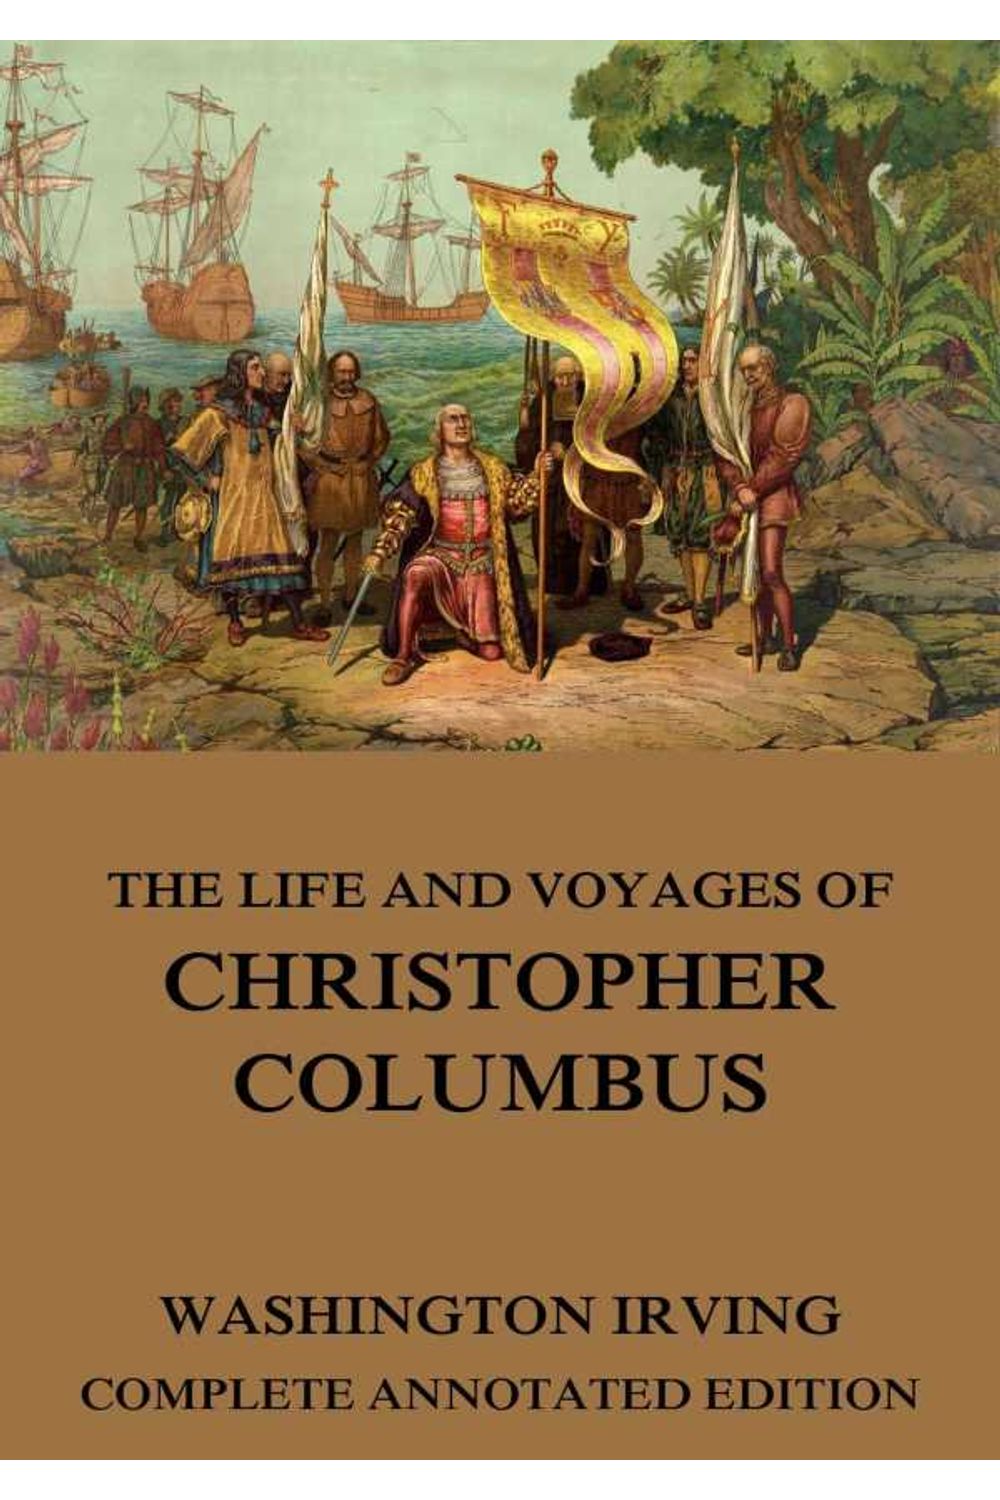 bw-the-life-and-voyages-of-christopher-columbus-jazzybee-verlag-9783849642020